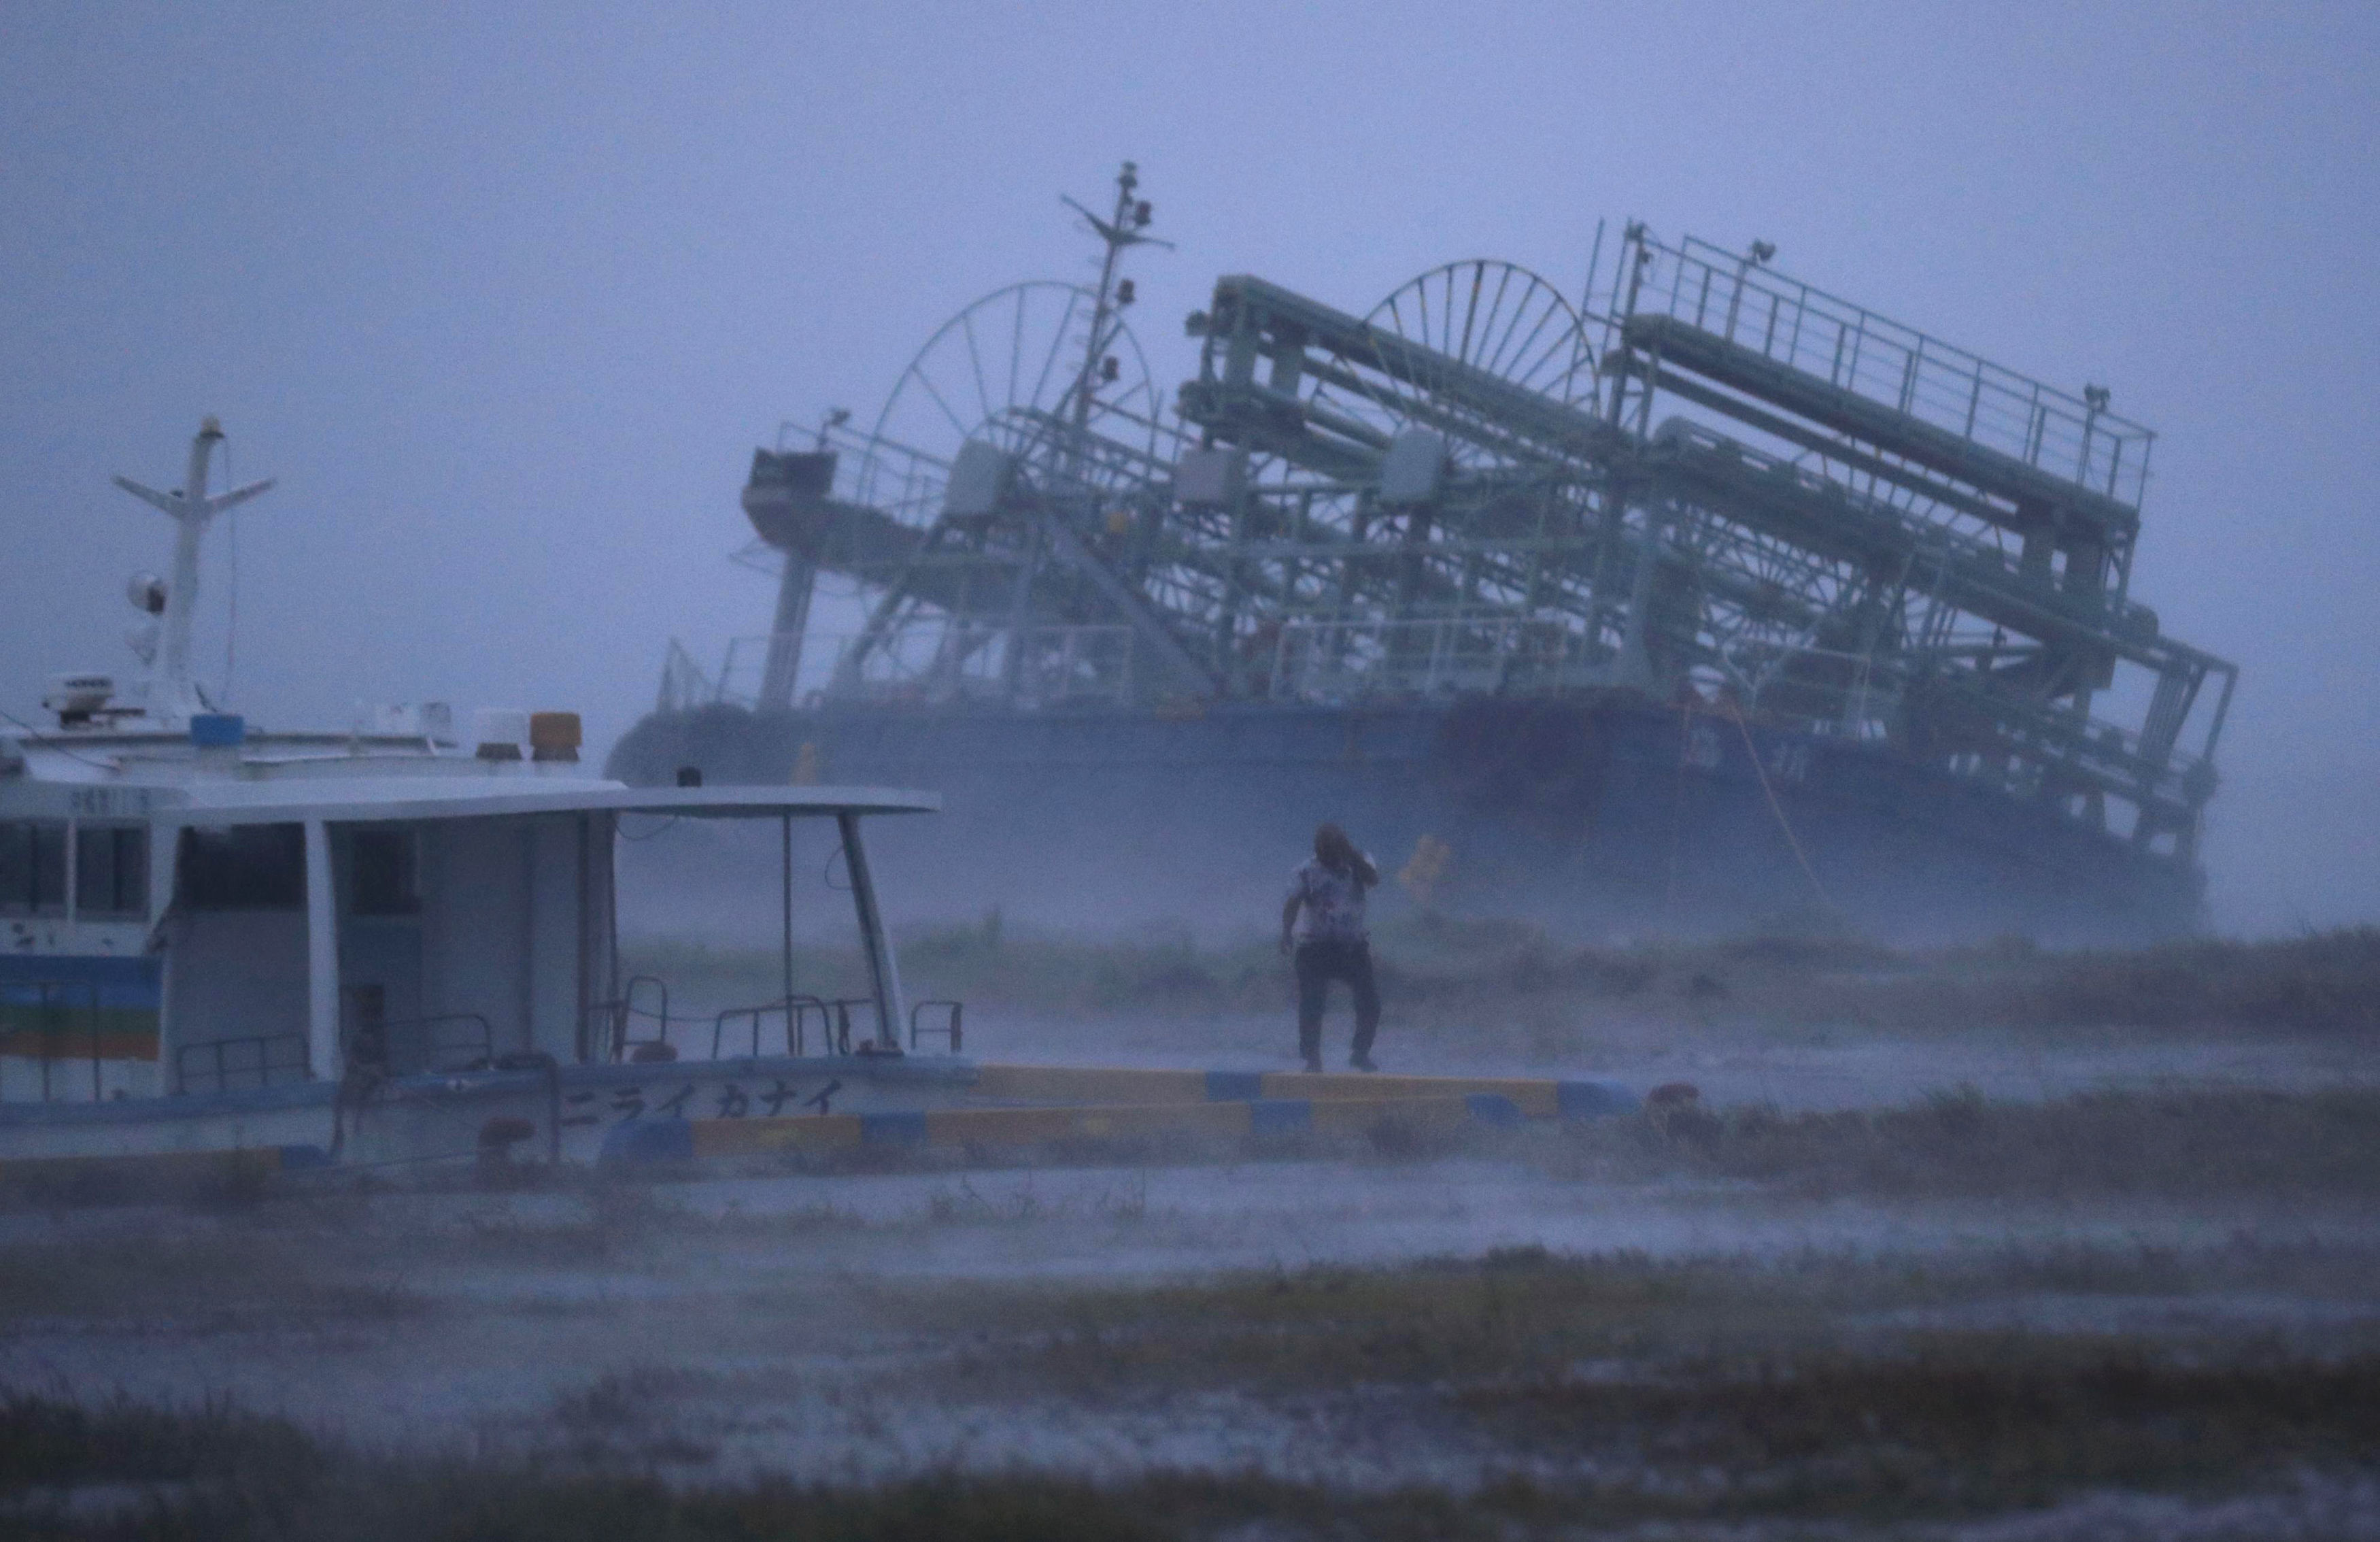 A vessel tilts as it ran ashore at a pier as a typhoon approached Yonabaru, Okinawa prefecture, in southern Japan